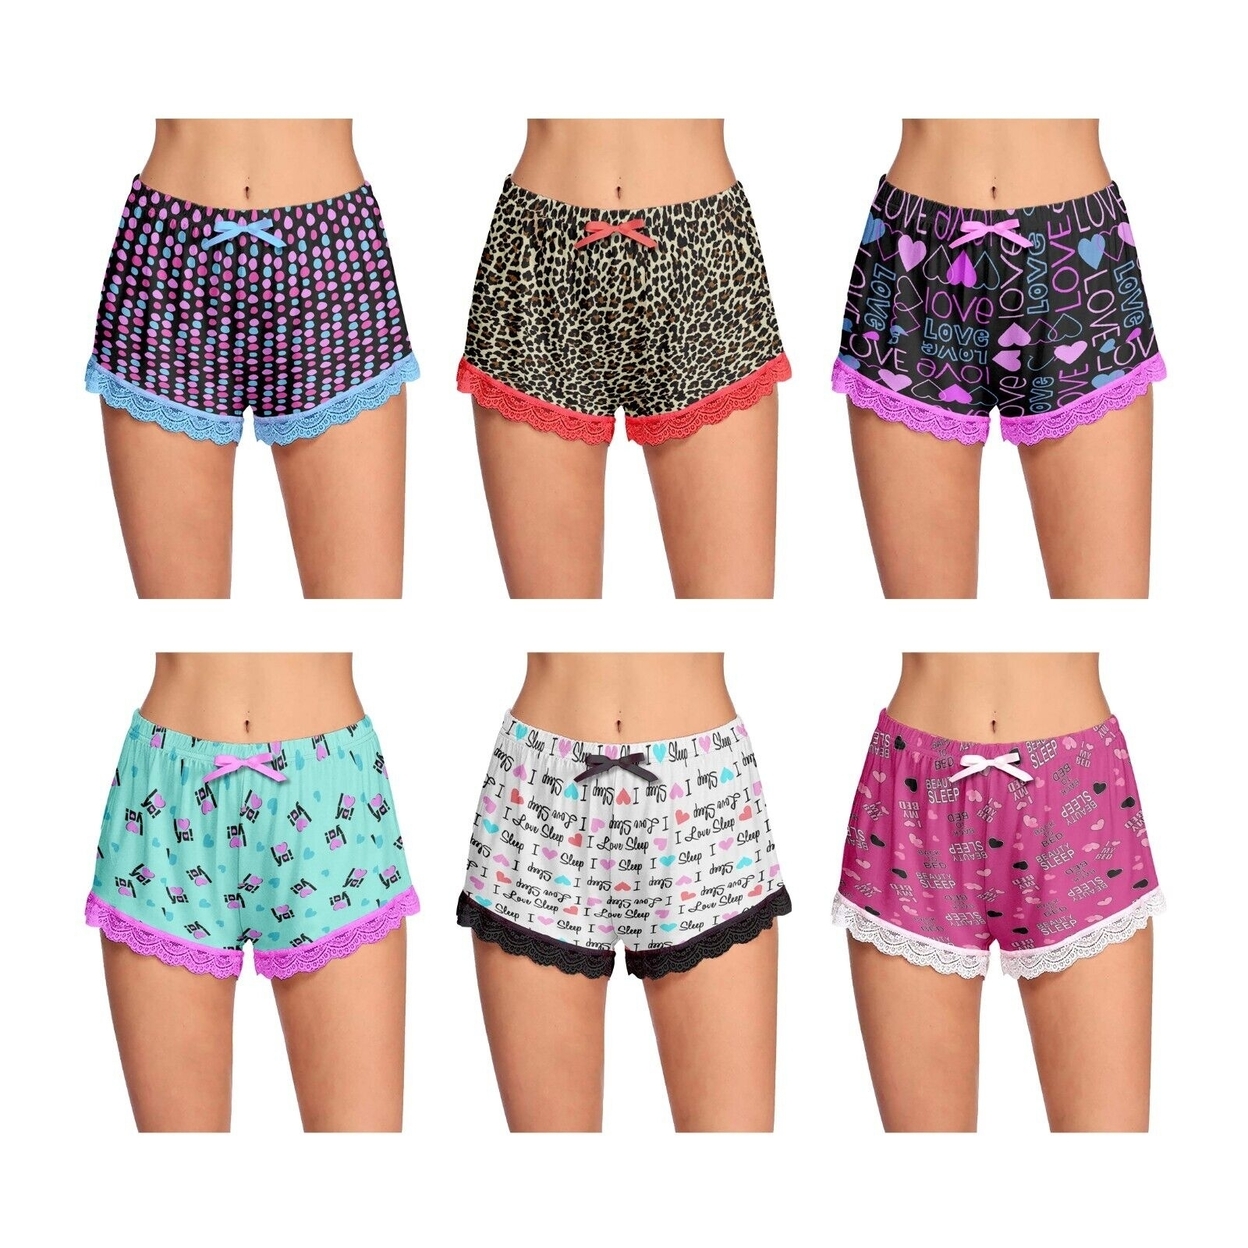 6-Pack: Women's Ultra-Soft Cozy Fun Printed Lace Trim Pajama Lounge Shorts - Large, Shapes